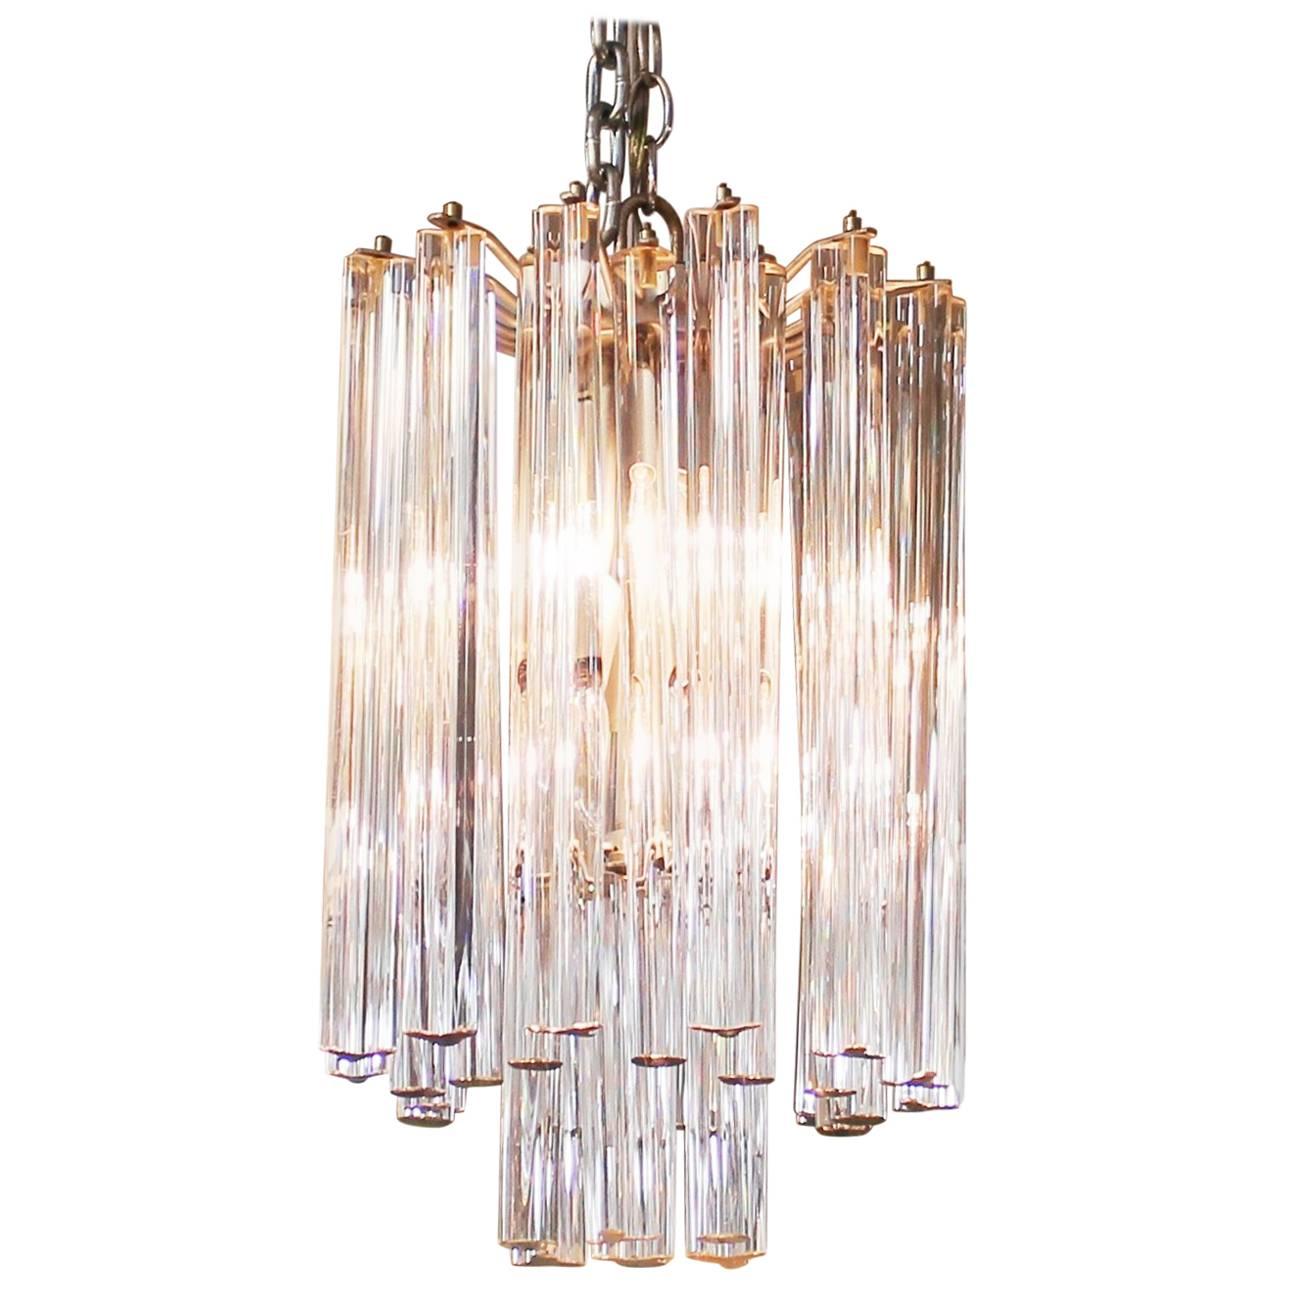 Midcentury Italian Venini Murano Chrome Chandelier with Cut and Round Crystals